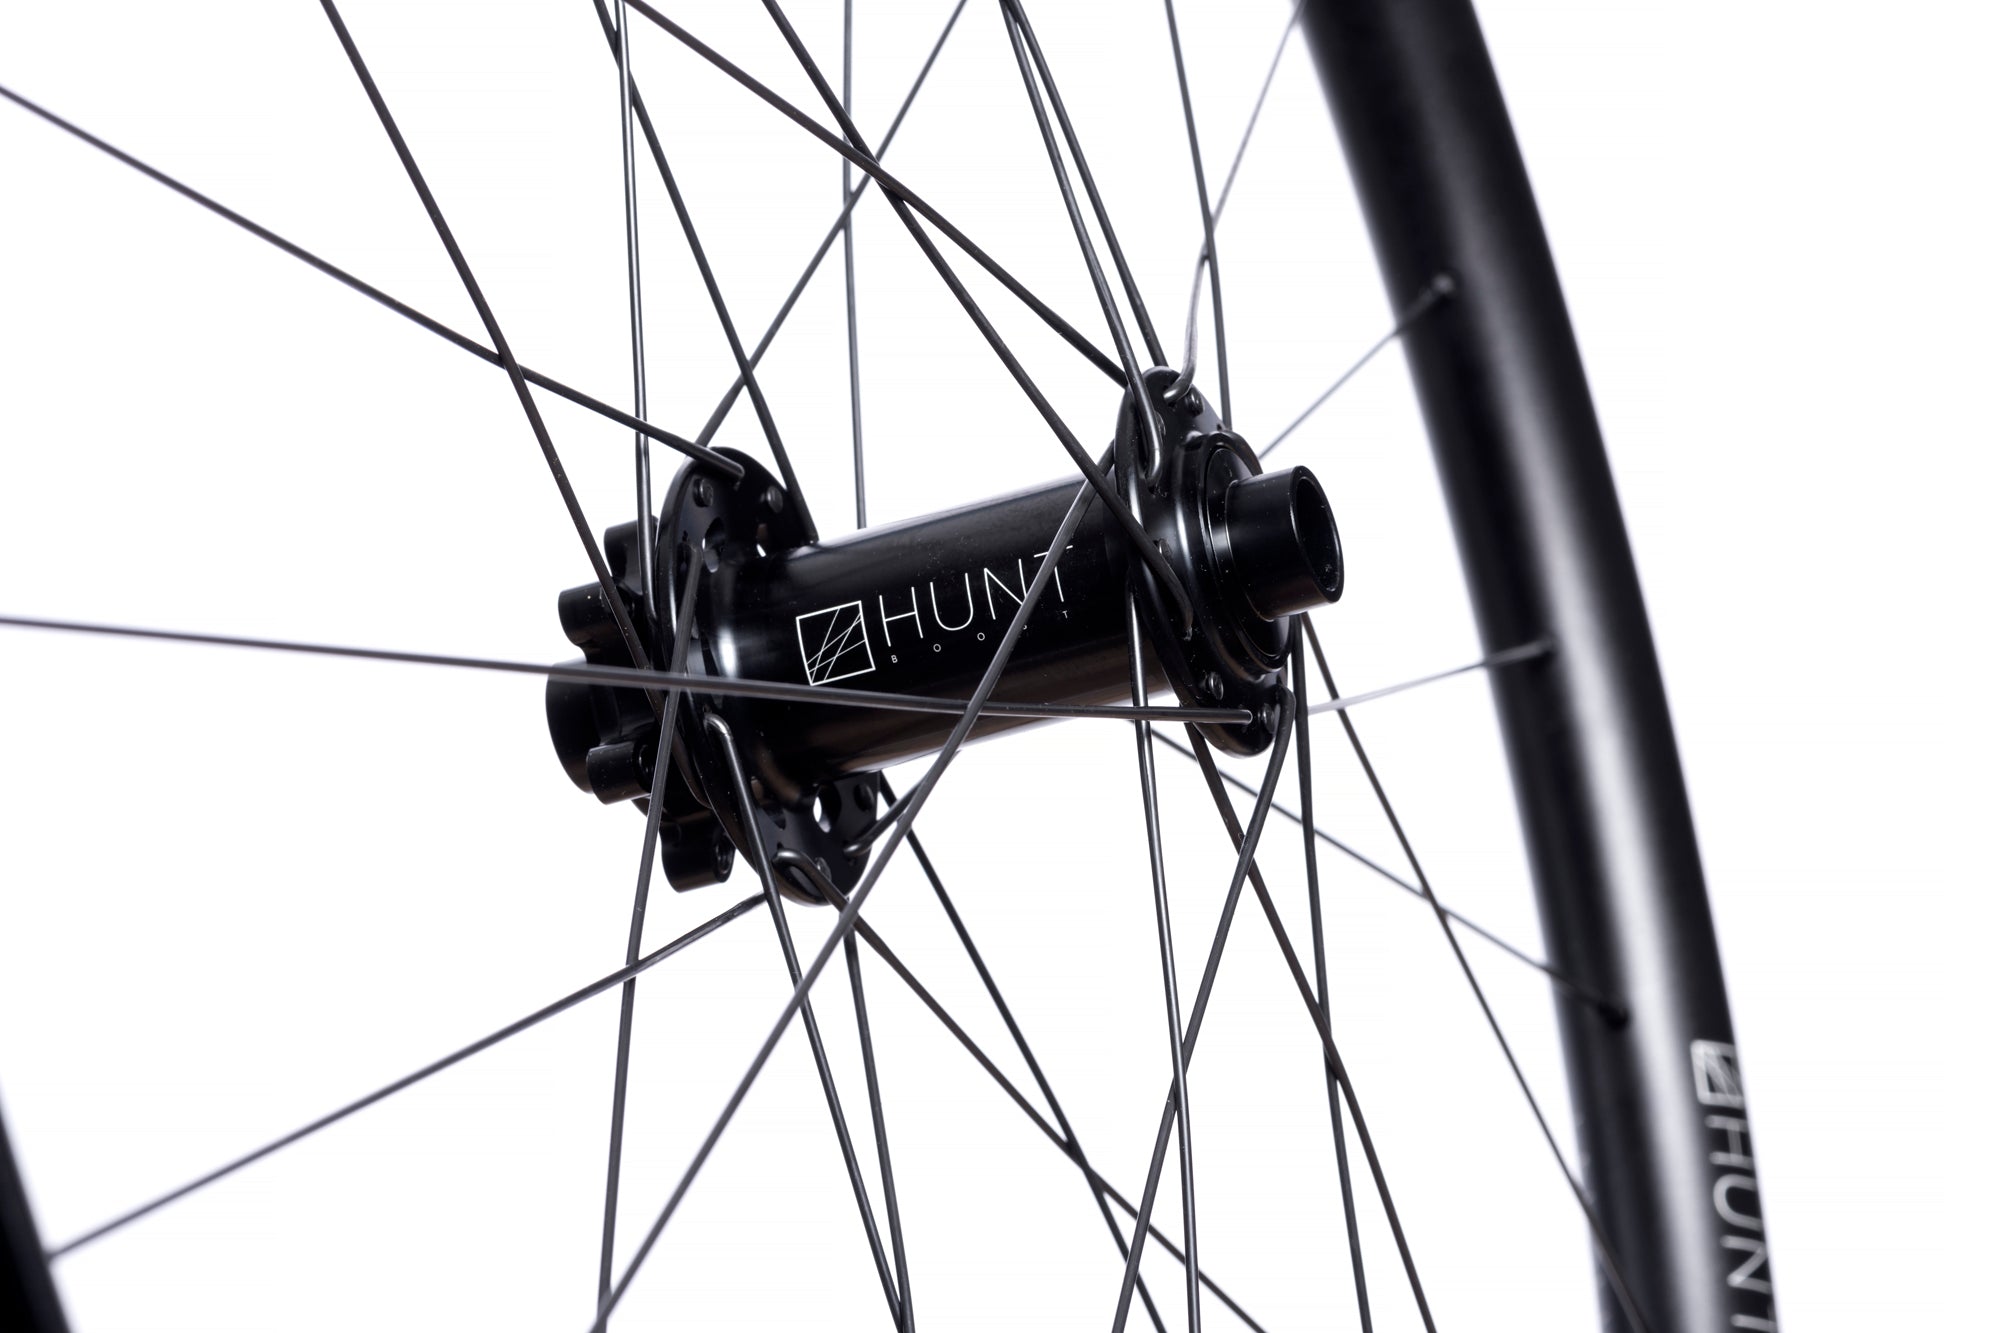 <h1>Front Hub</h1><i>Suited to match the needs of the modern trail bike rider. Featuring durable bearings and 7075-T6 series alloy axles to increase stiffness. These hubs have been selected based on their ability to perform on the most aggressive trails.</i>